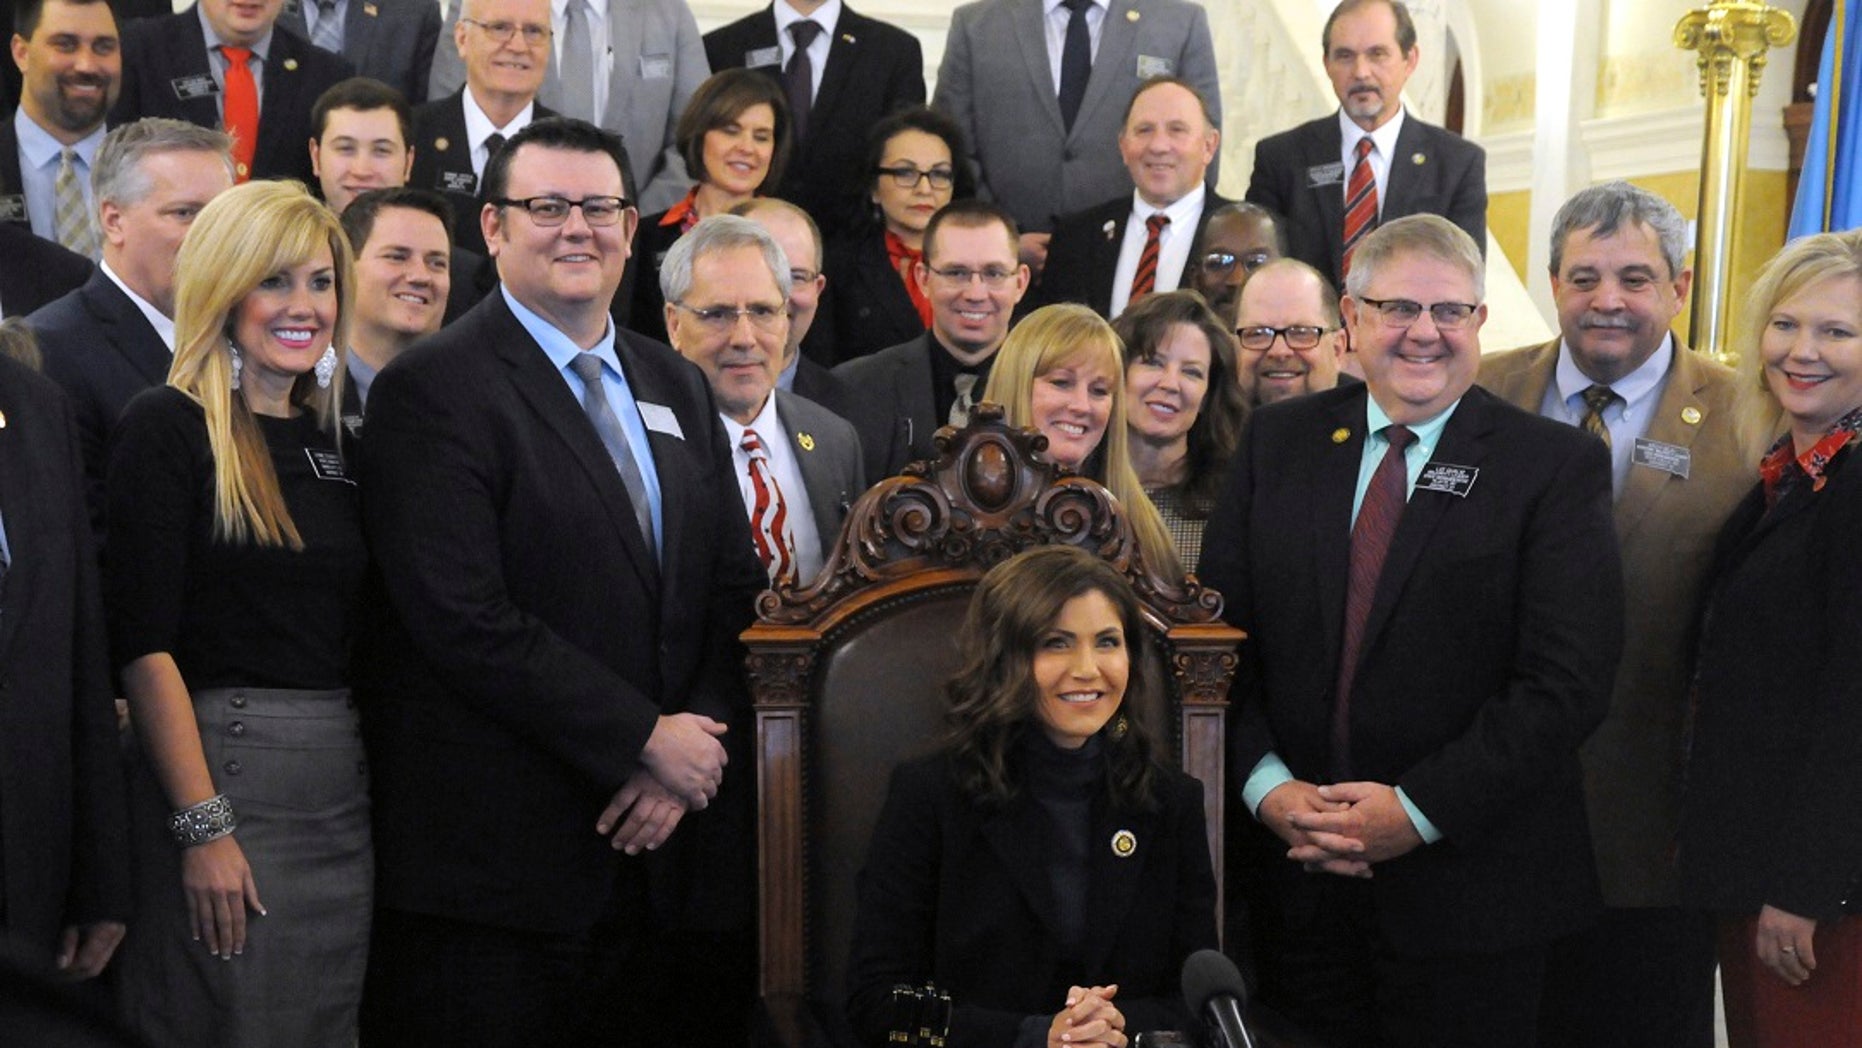 Gov. Kristi Noem smiles after signing her first bill into law at the state Capitol in Pierre, S.D., Thursday, Jan. 31, 2019. The measure allows people to carry concealed pistols without a permit in the state. (Associated Press)